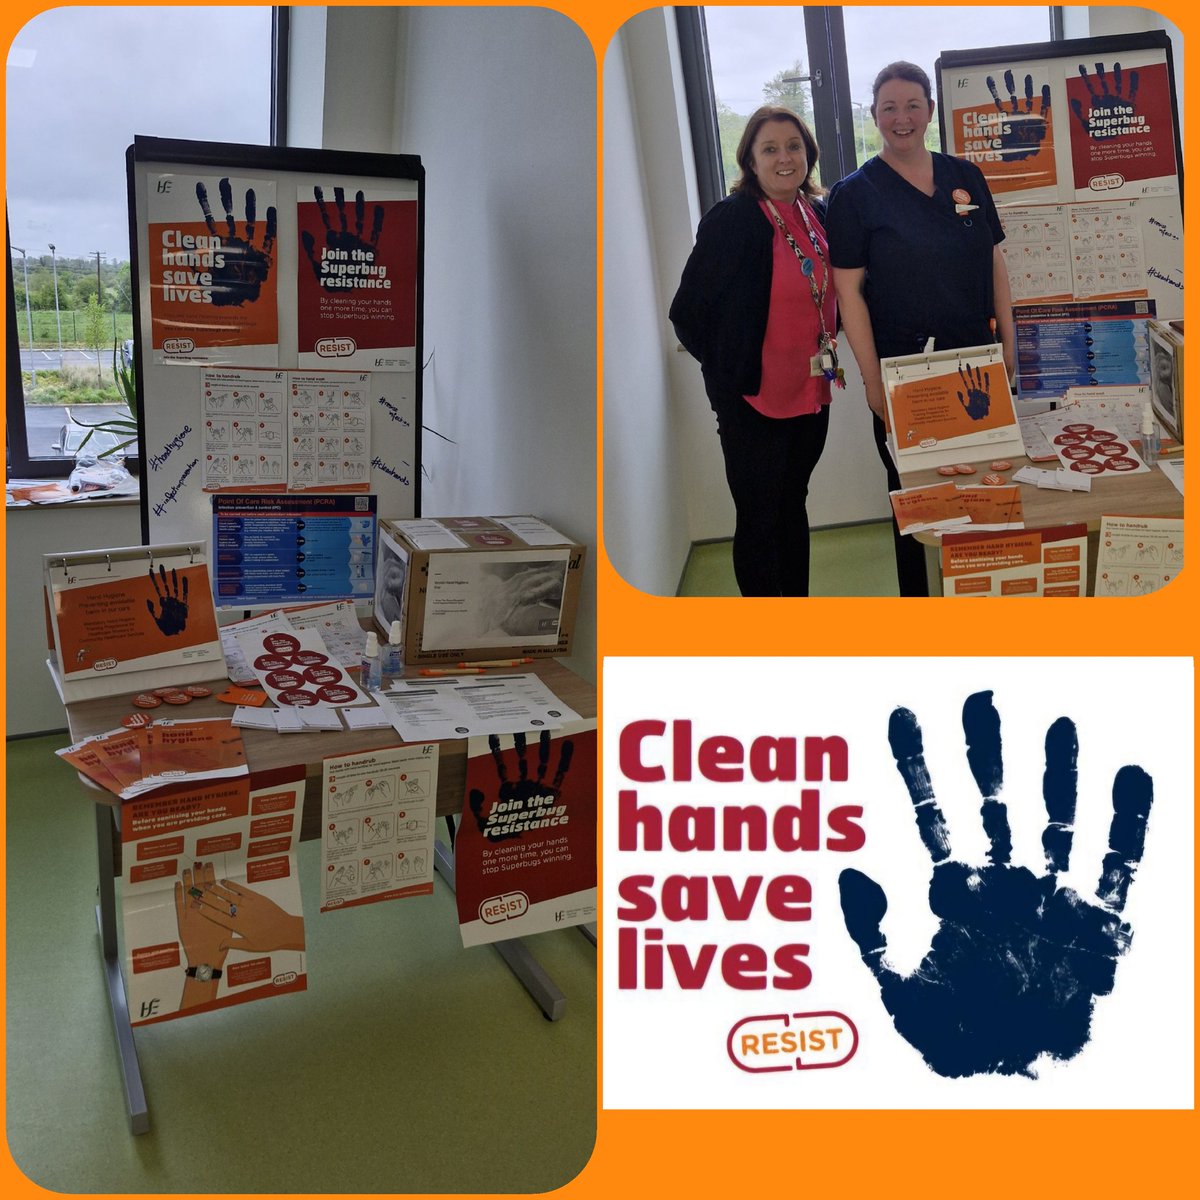 Celebrating WHO International Hand Hygiene Day in Thurles Primary Care Centre today! A great refresher on hand hygiene technique and lots of interest in the quiz run by the Community Intervention Team, fingers crossed for all the entries! #infectionprevention #cleanhands